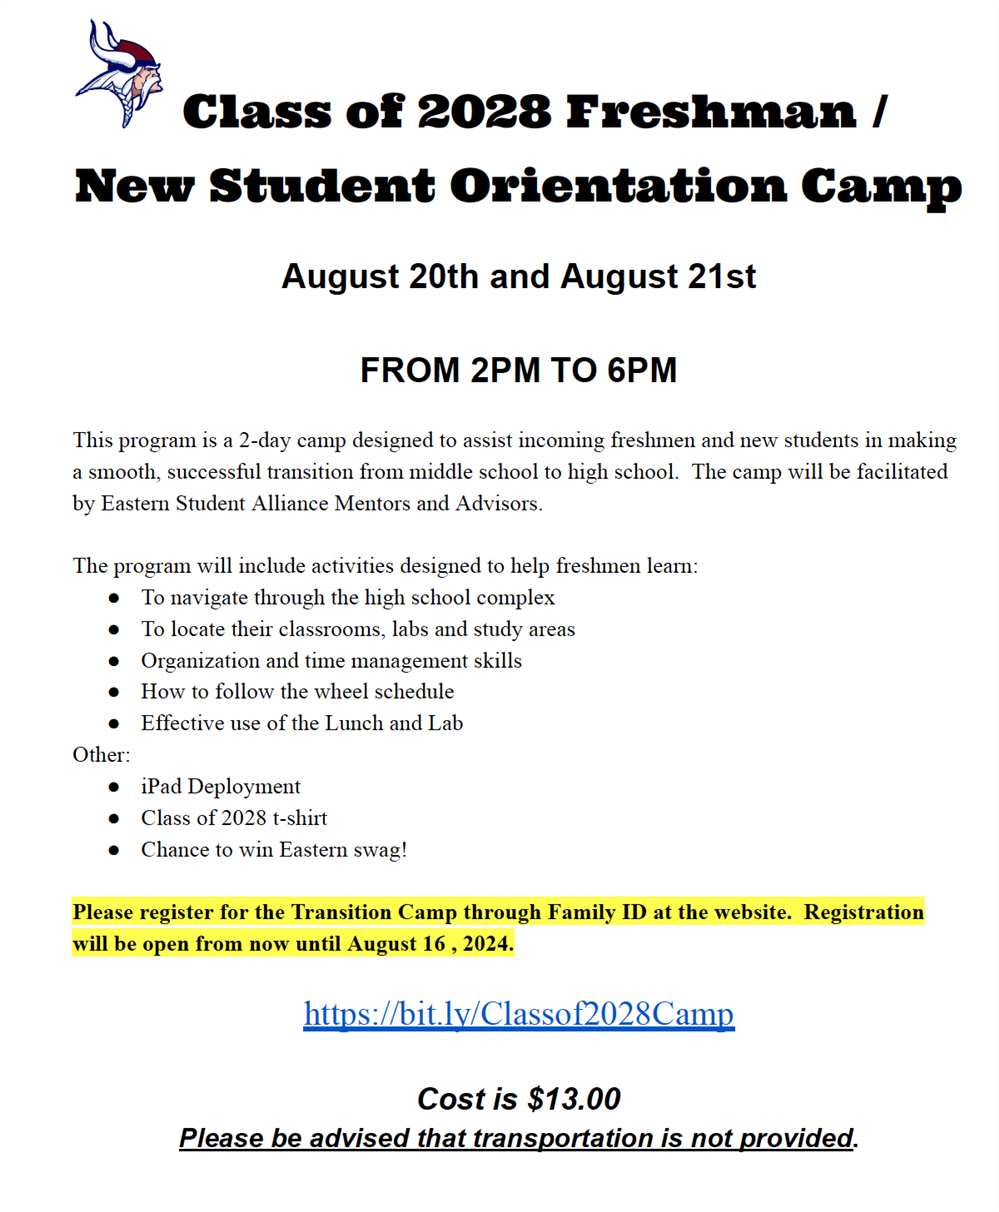 Class of 2028 Freshman / New Student Orientation Camp (August 20th and August 21st, 2024)